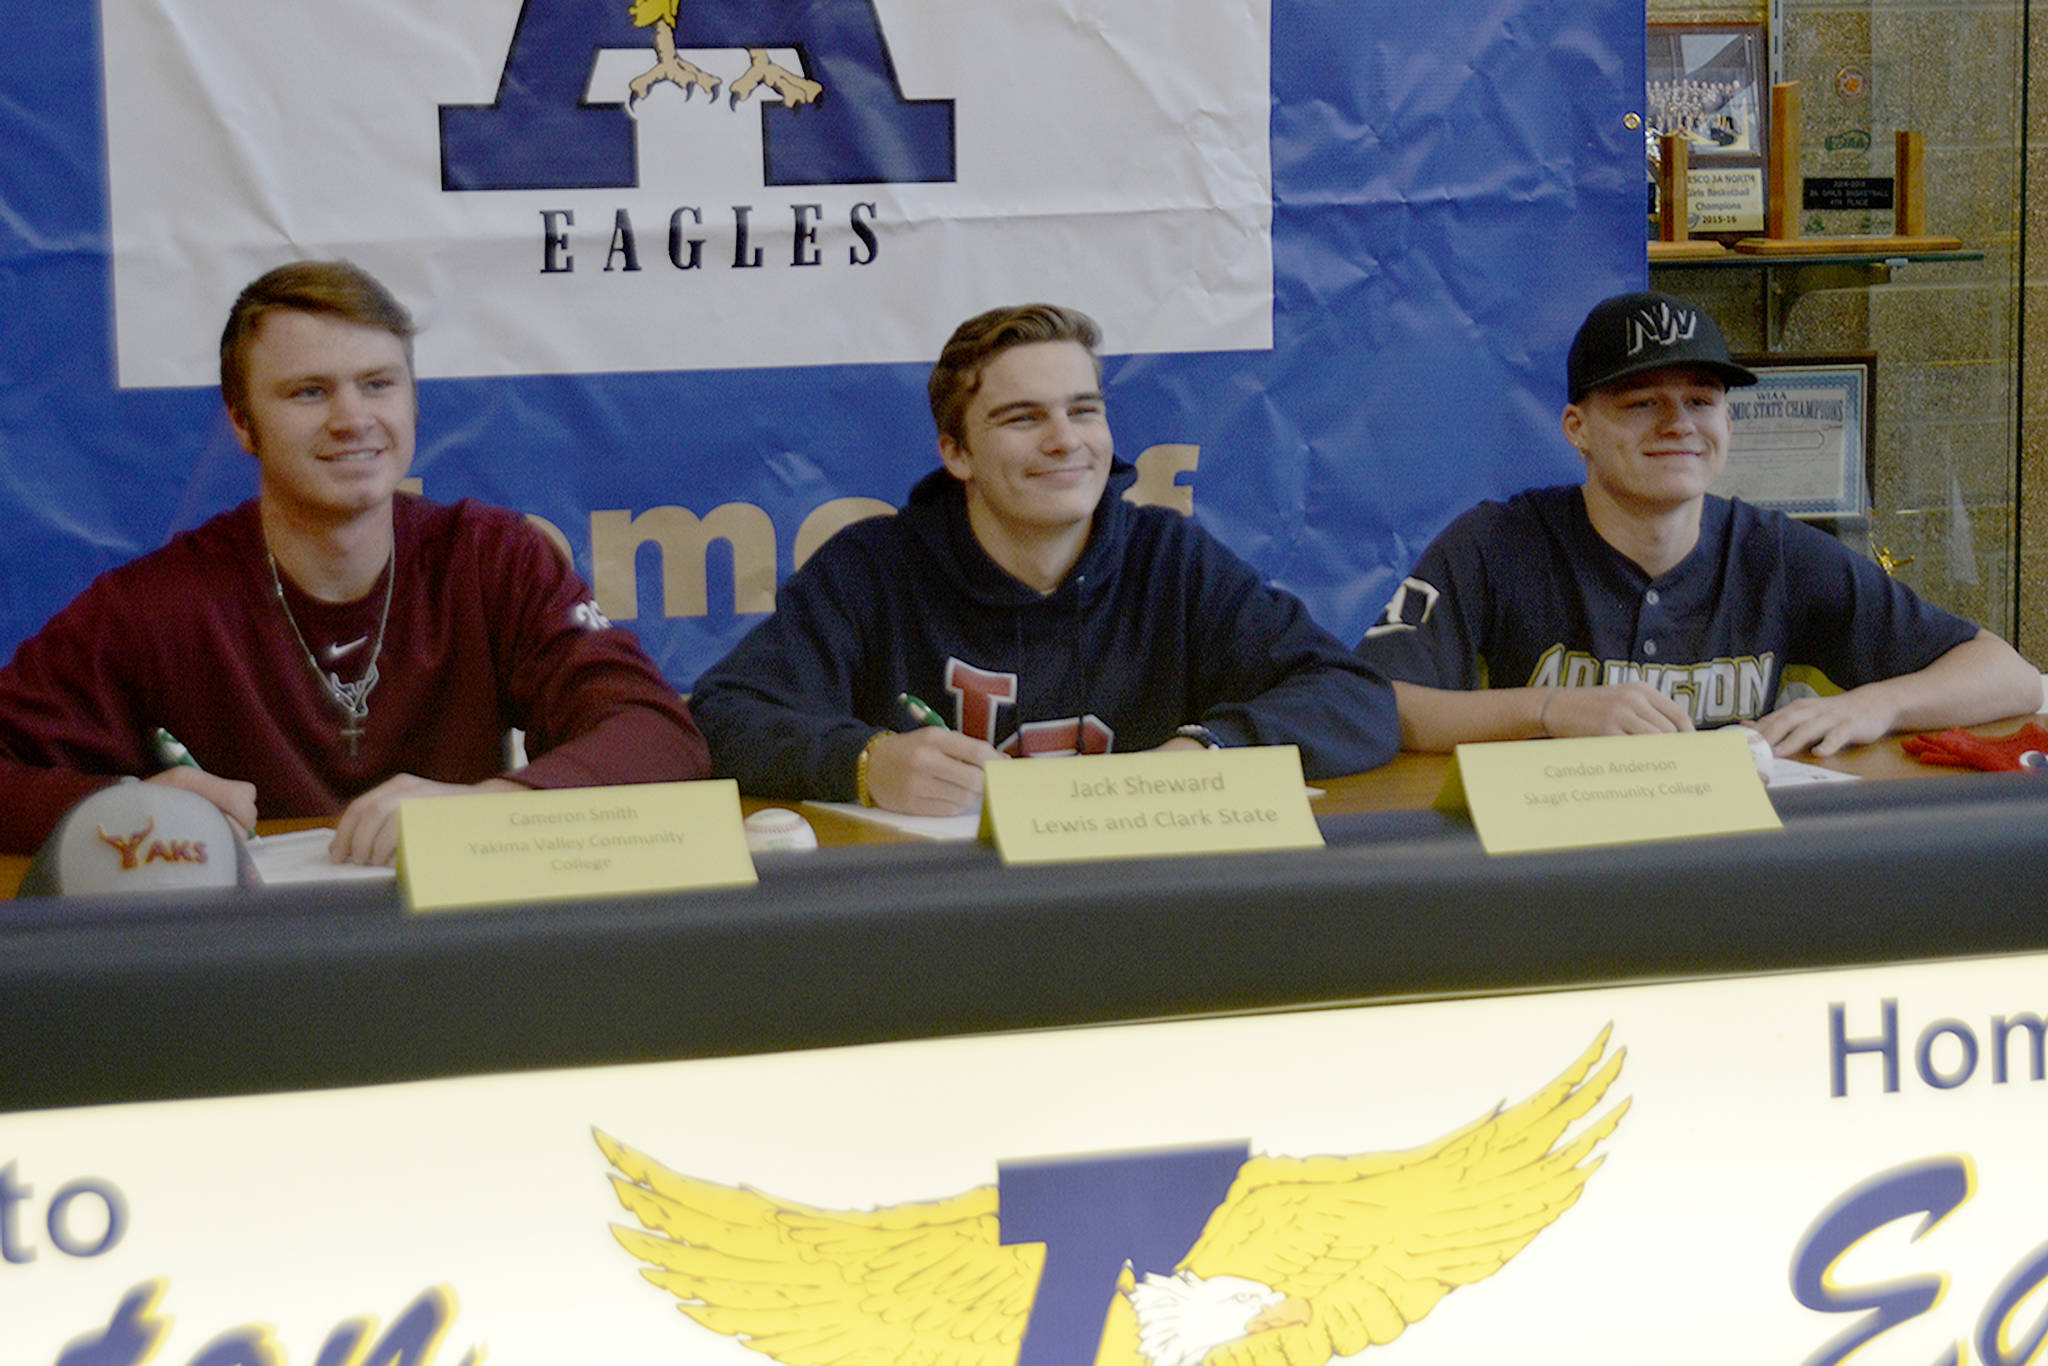 3 Eagles sign to play baseball in college